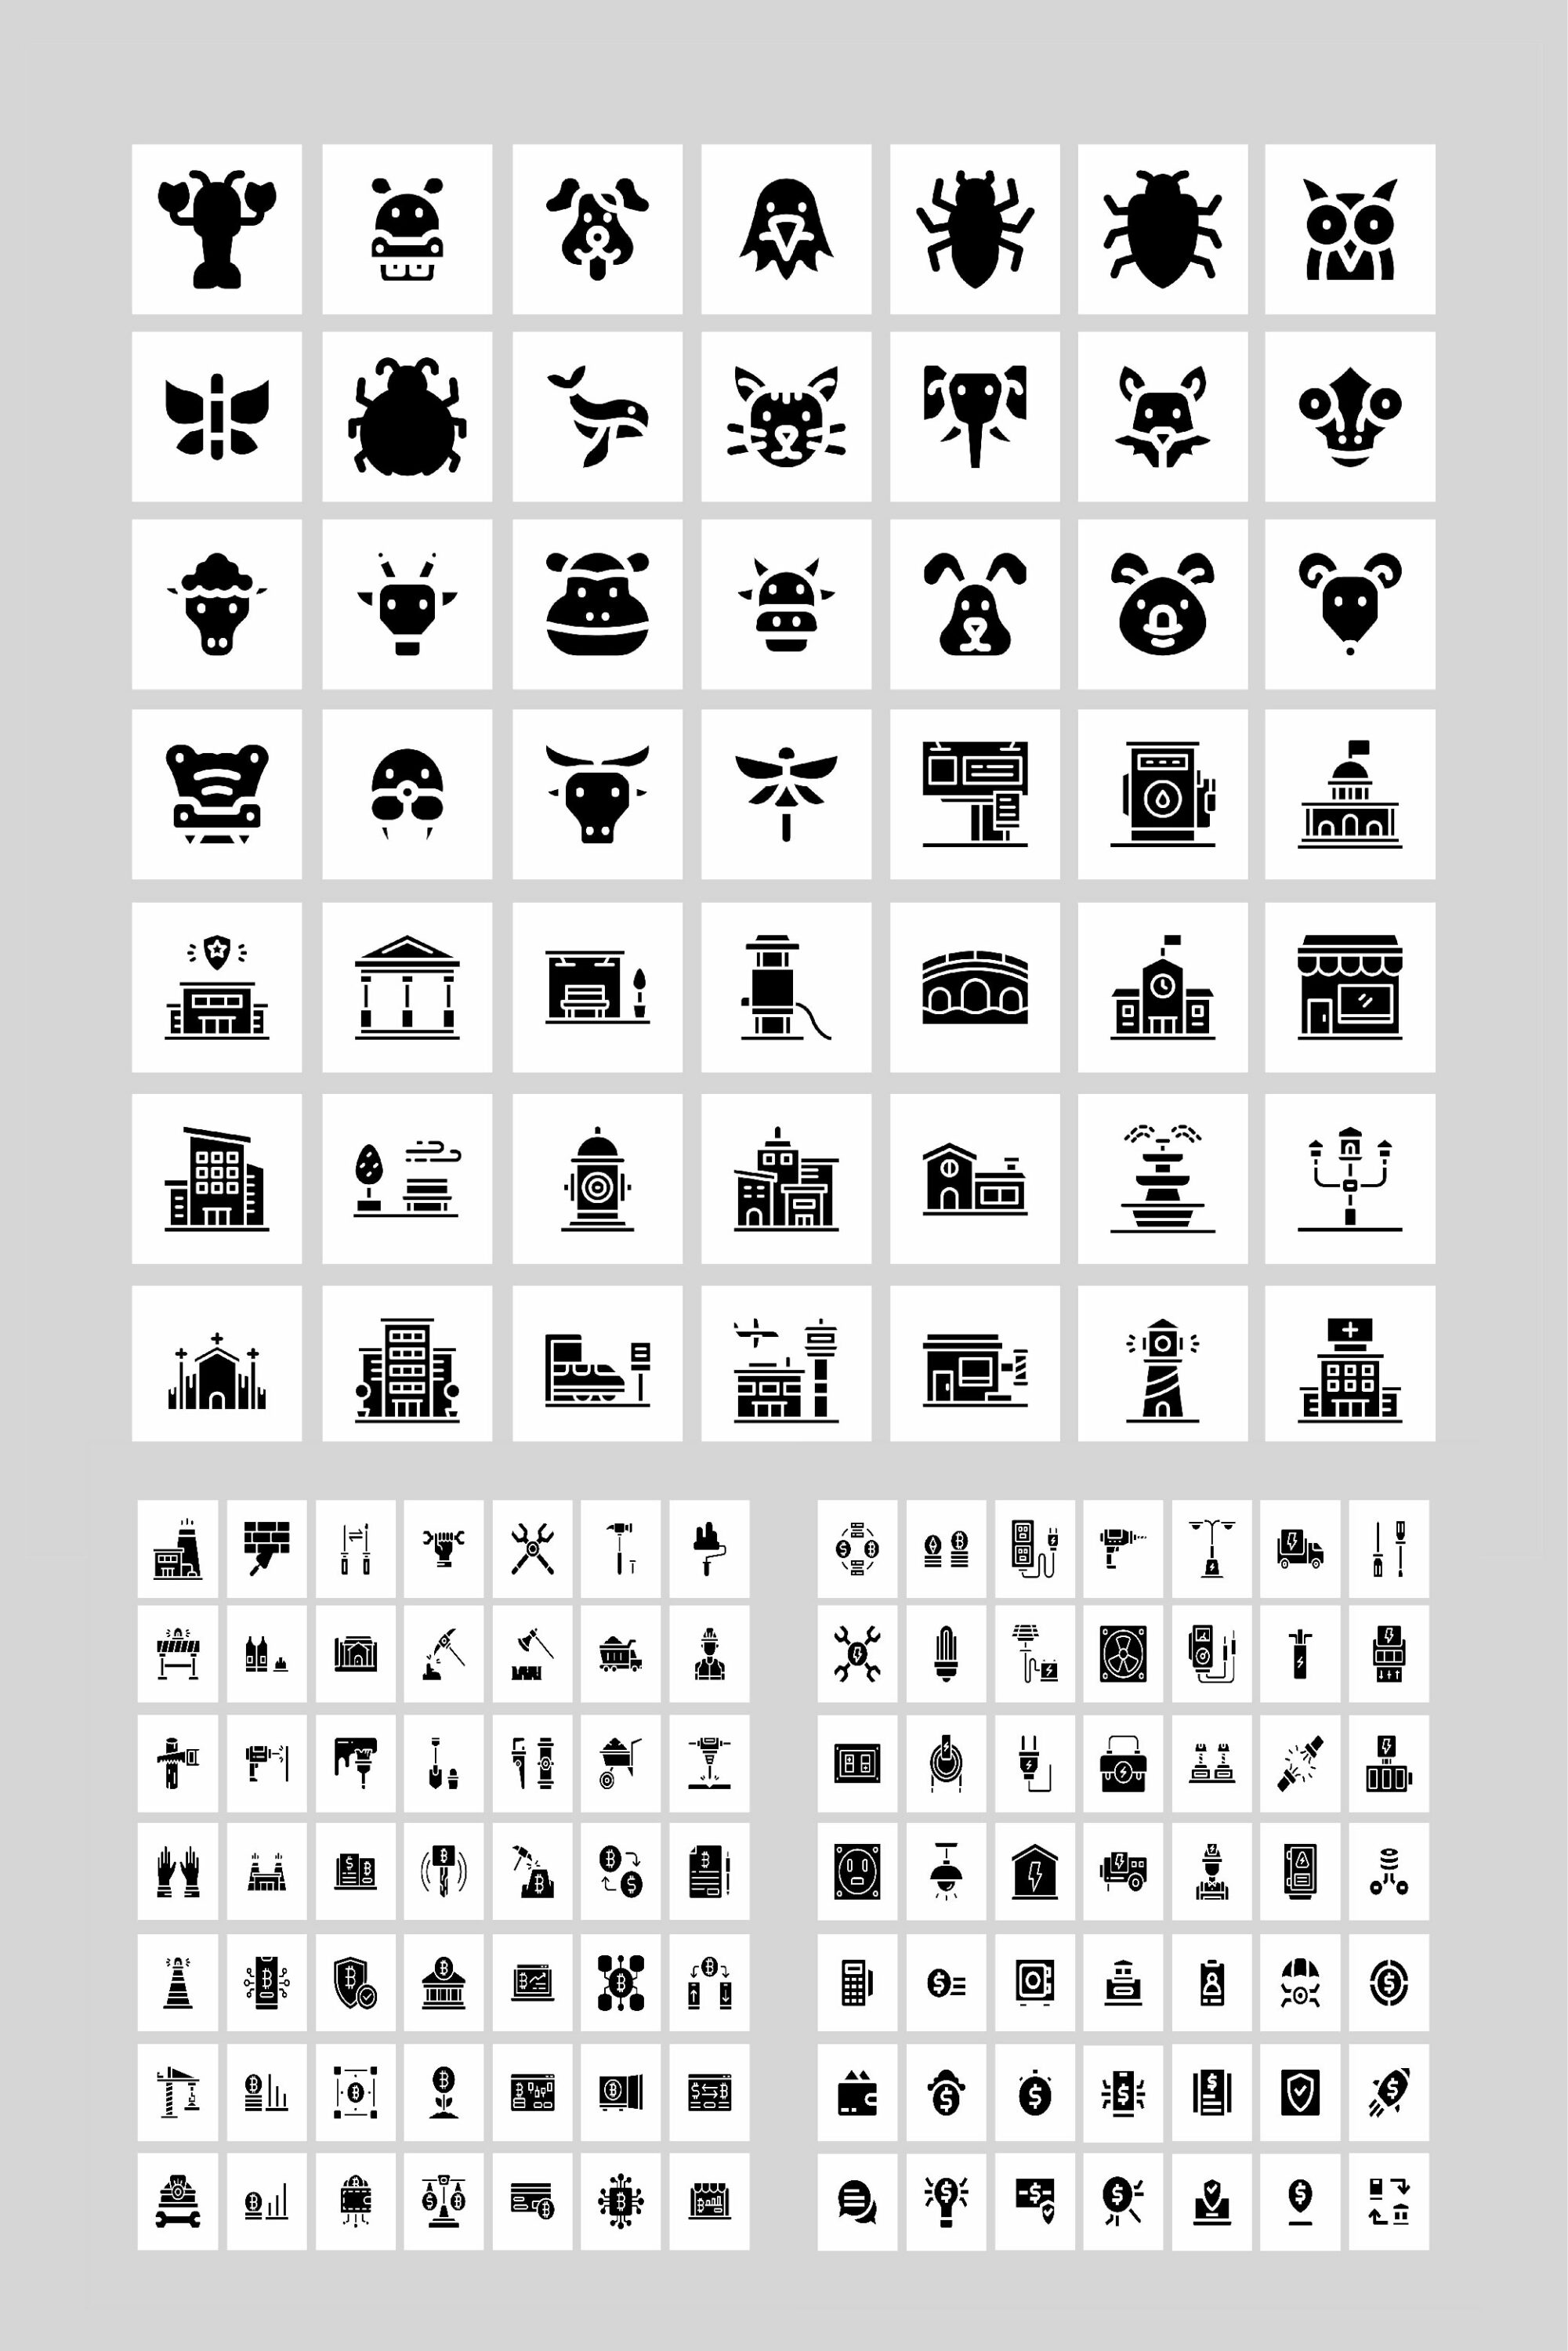 Awesome Solid Vector Icons pinterest.